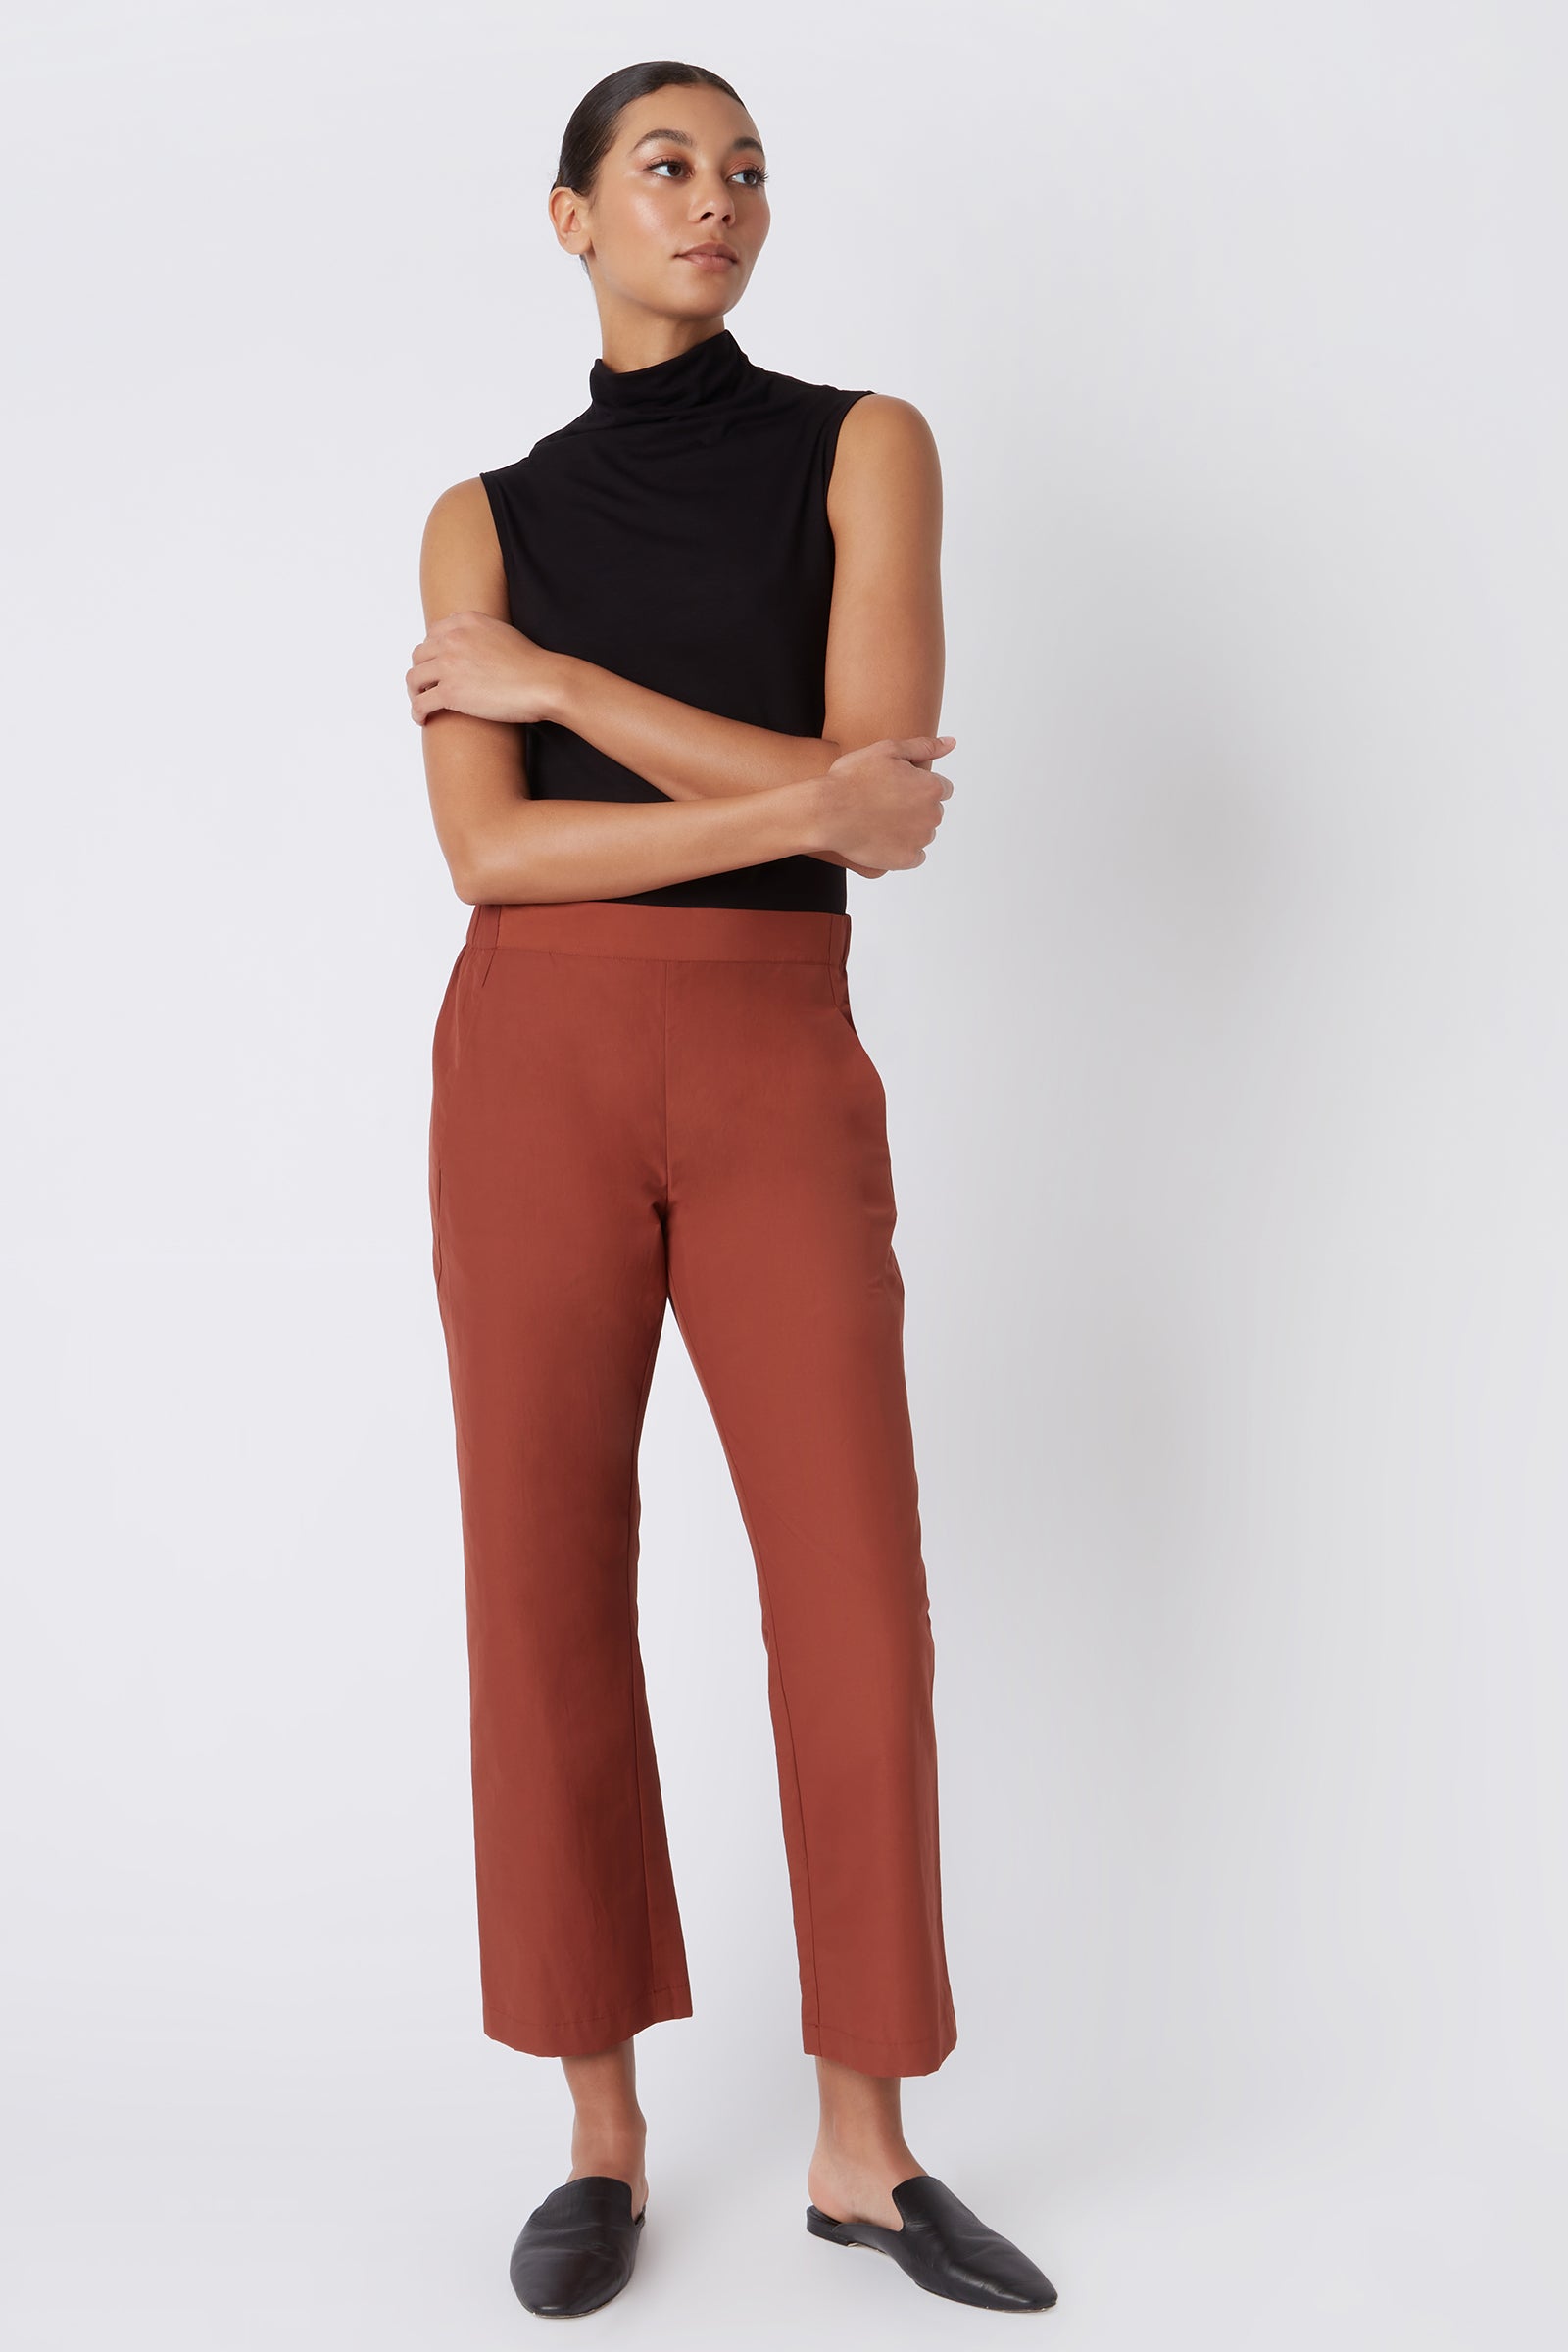 Kal Rieman Brit Crop Pant in Rust Italian Broadcloth on Model with Arms Crossed Full Front View